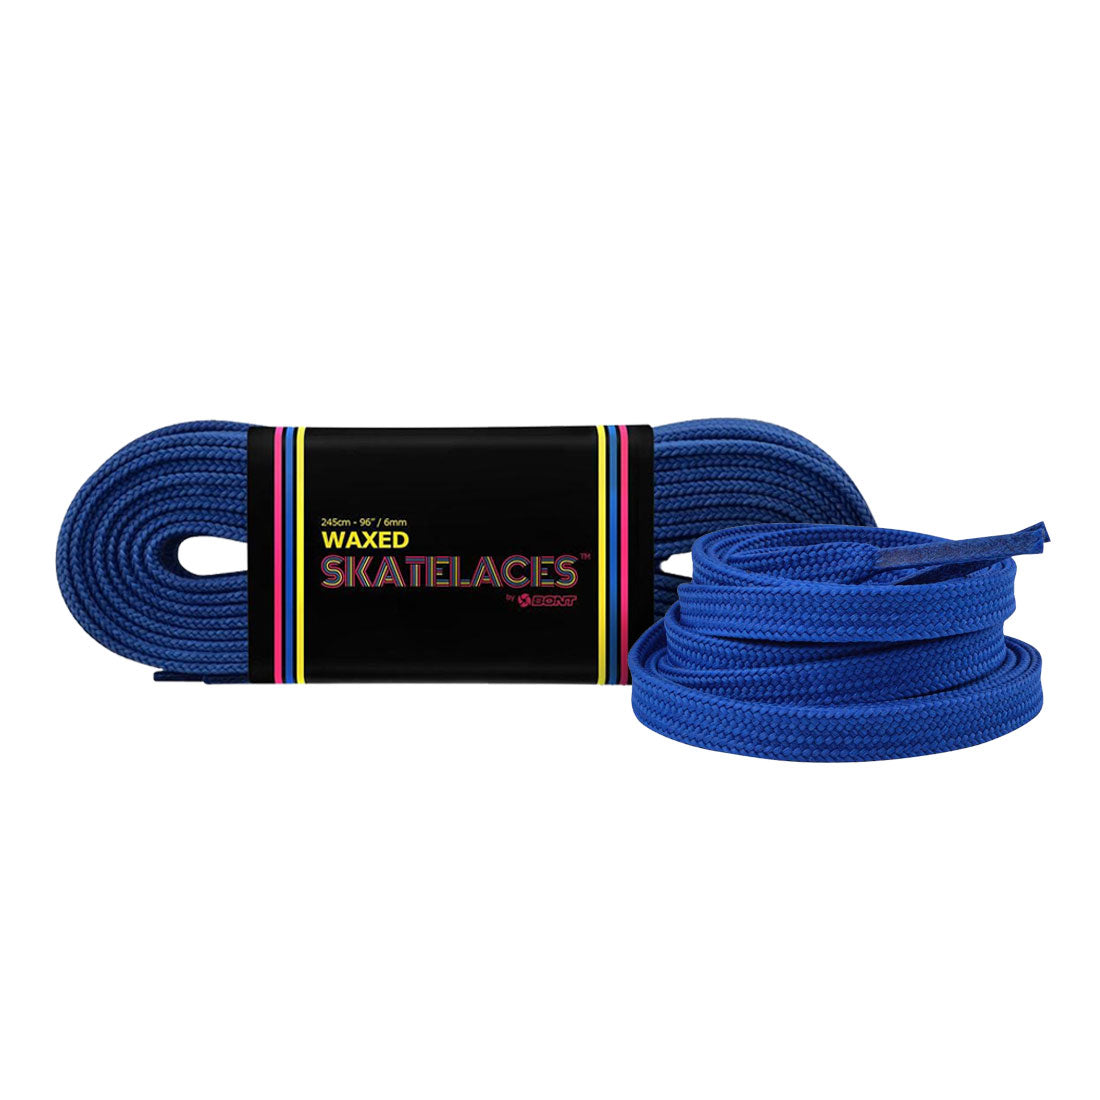 Bont Waxed 8mm Laces - 200cm/79in Mad About You Blue Laces